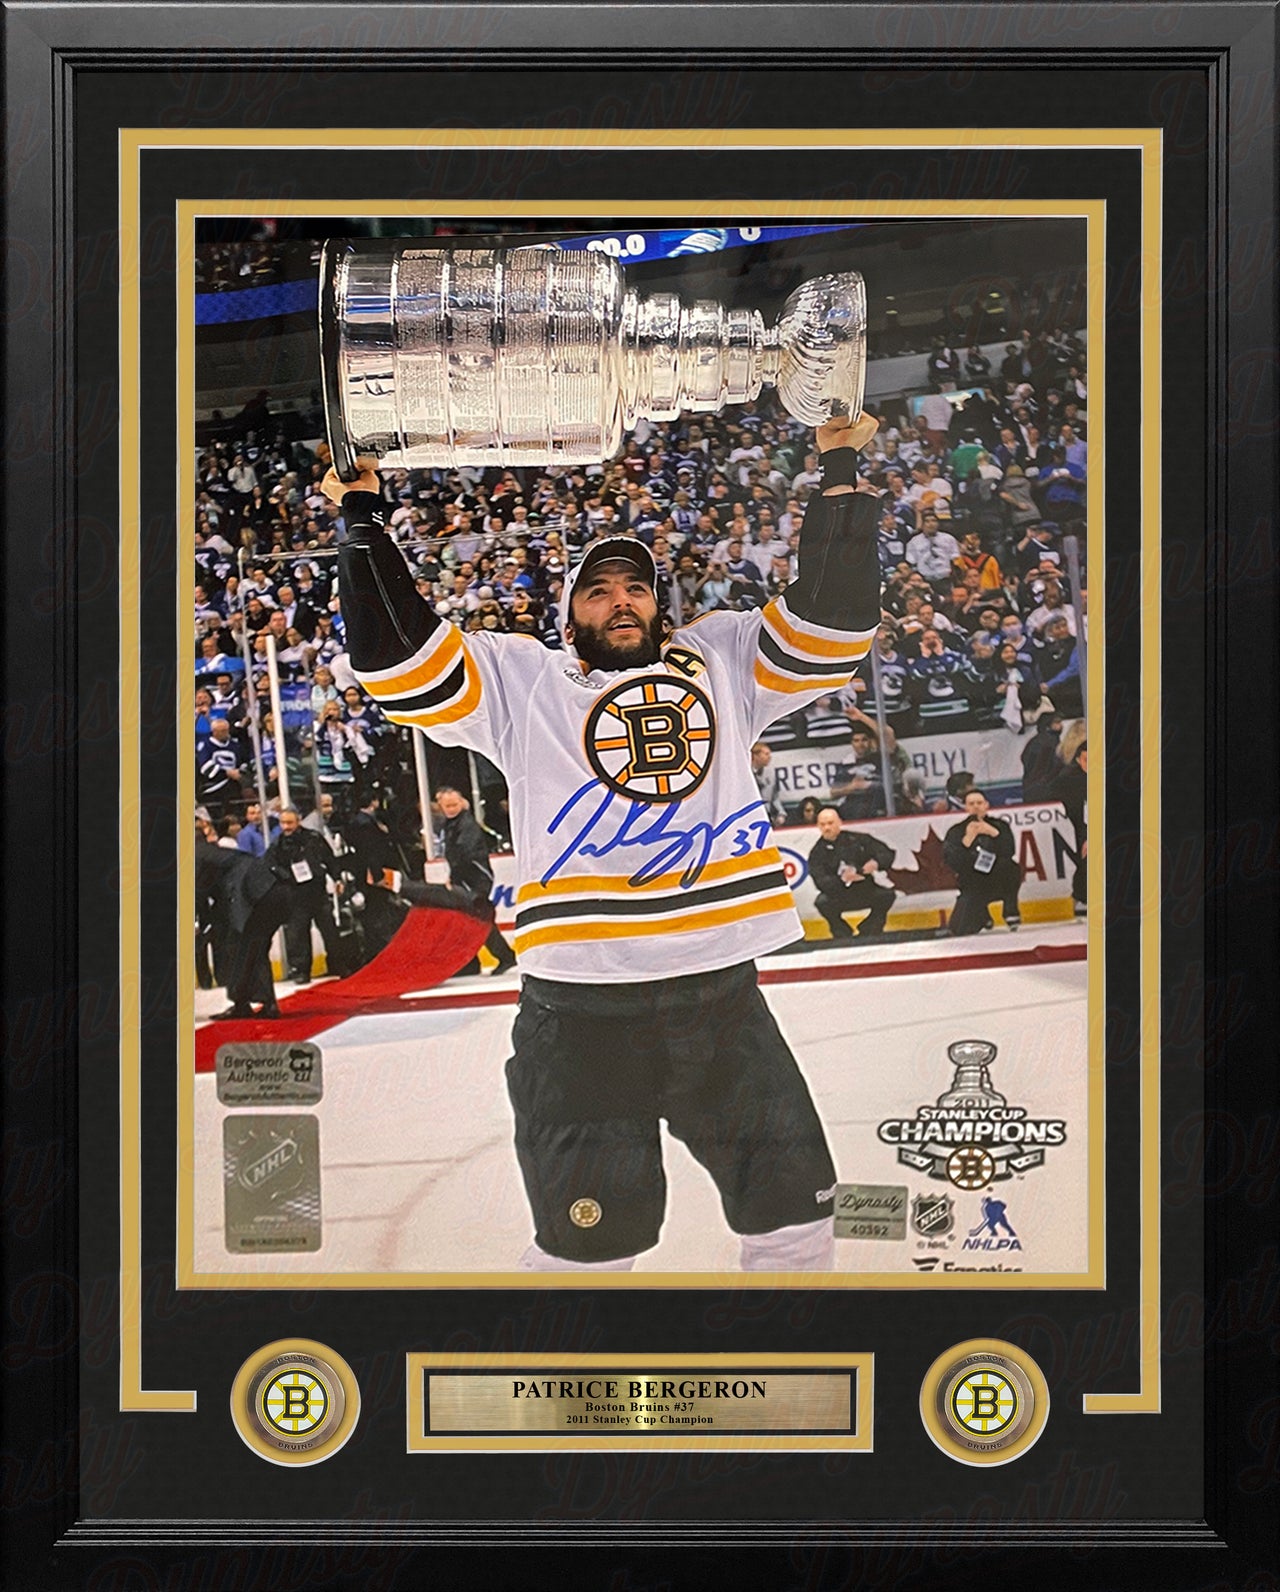 Patrice Bergeron 2011 Stanley Cup Boston Bruins Autographed 16" x 20" Framed Hockey Photo